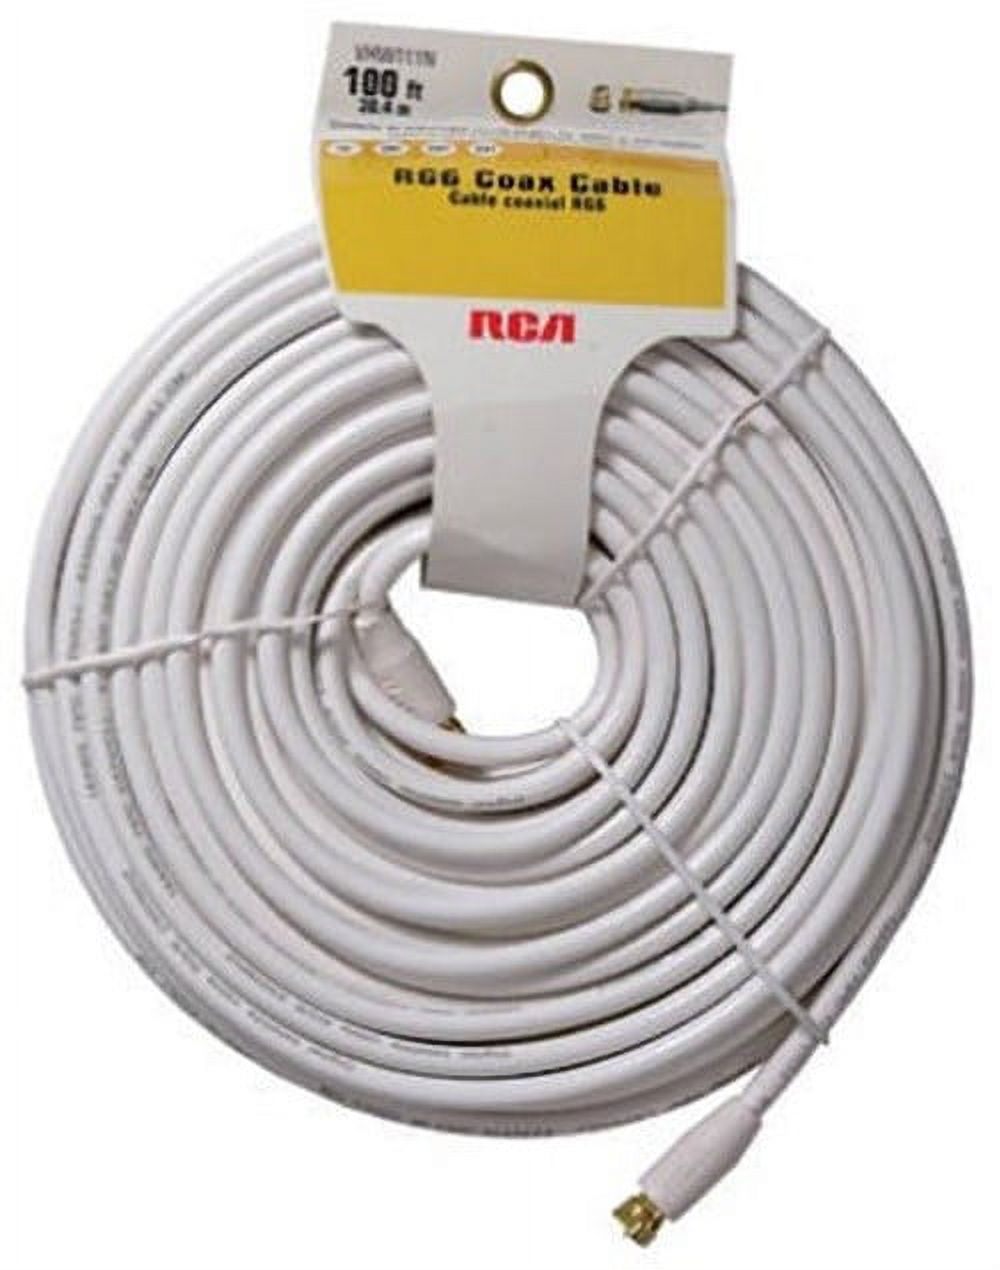 Audiovox VHW111N 100 ft. White Rg6 Coax Cable - image 2 of 2